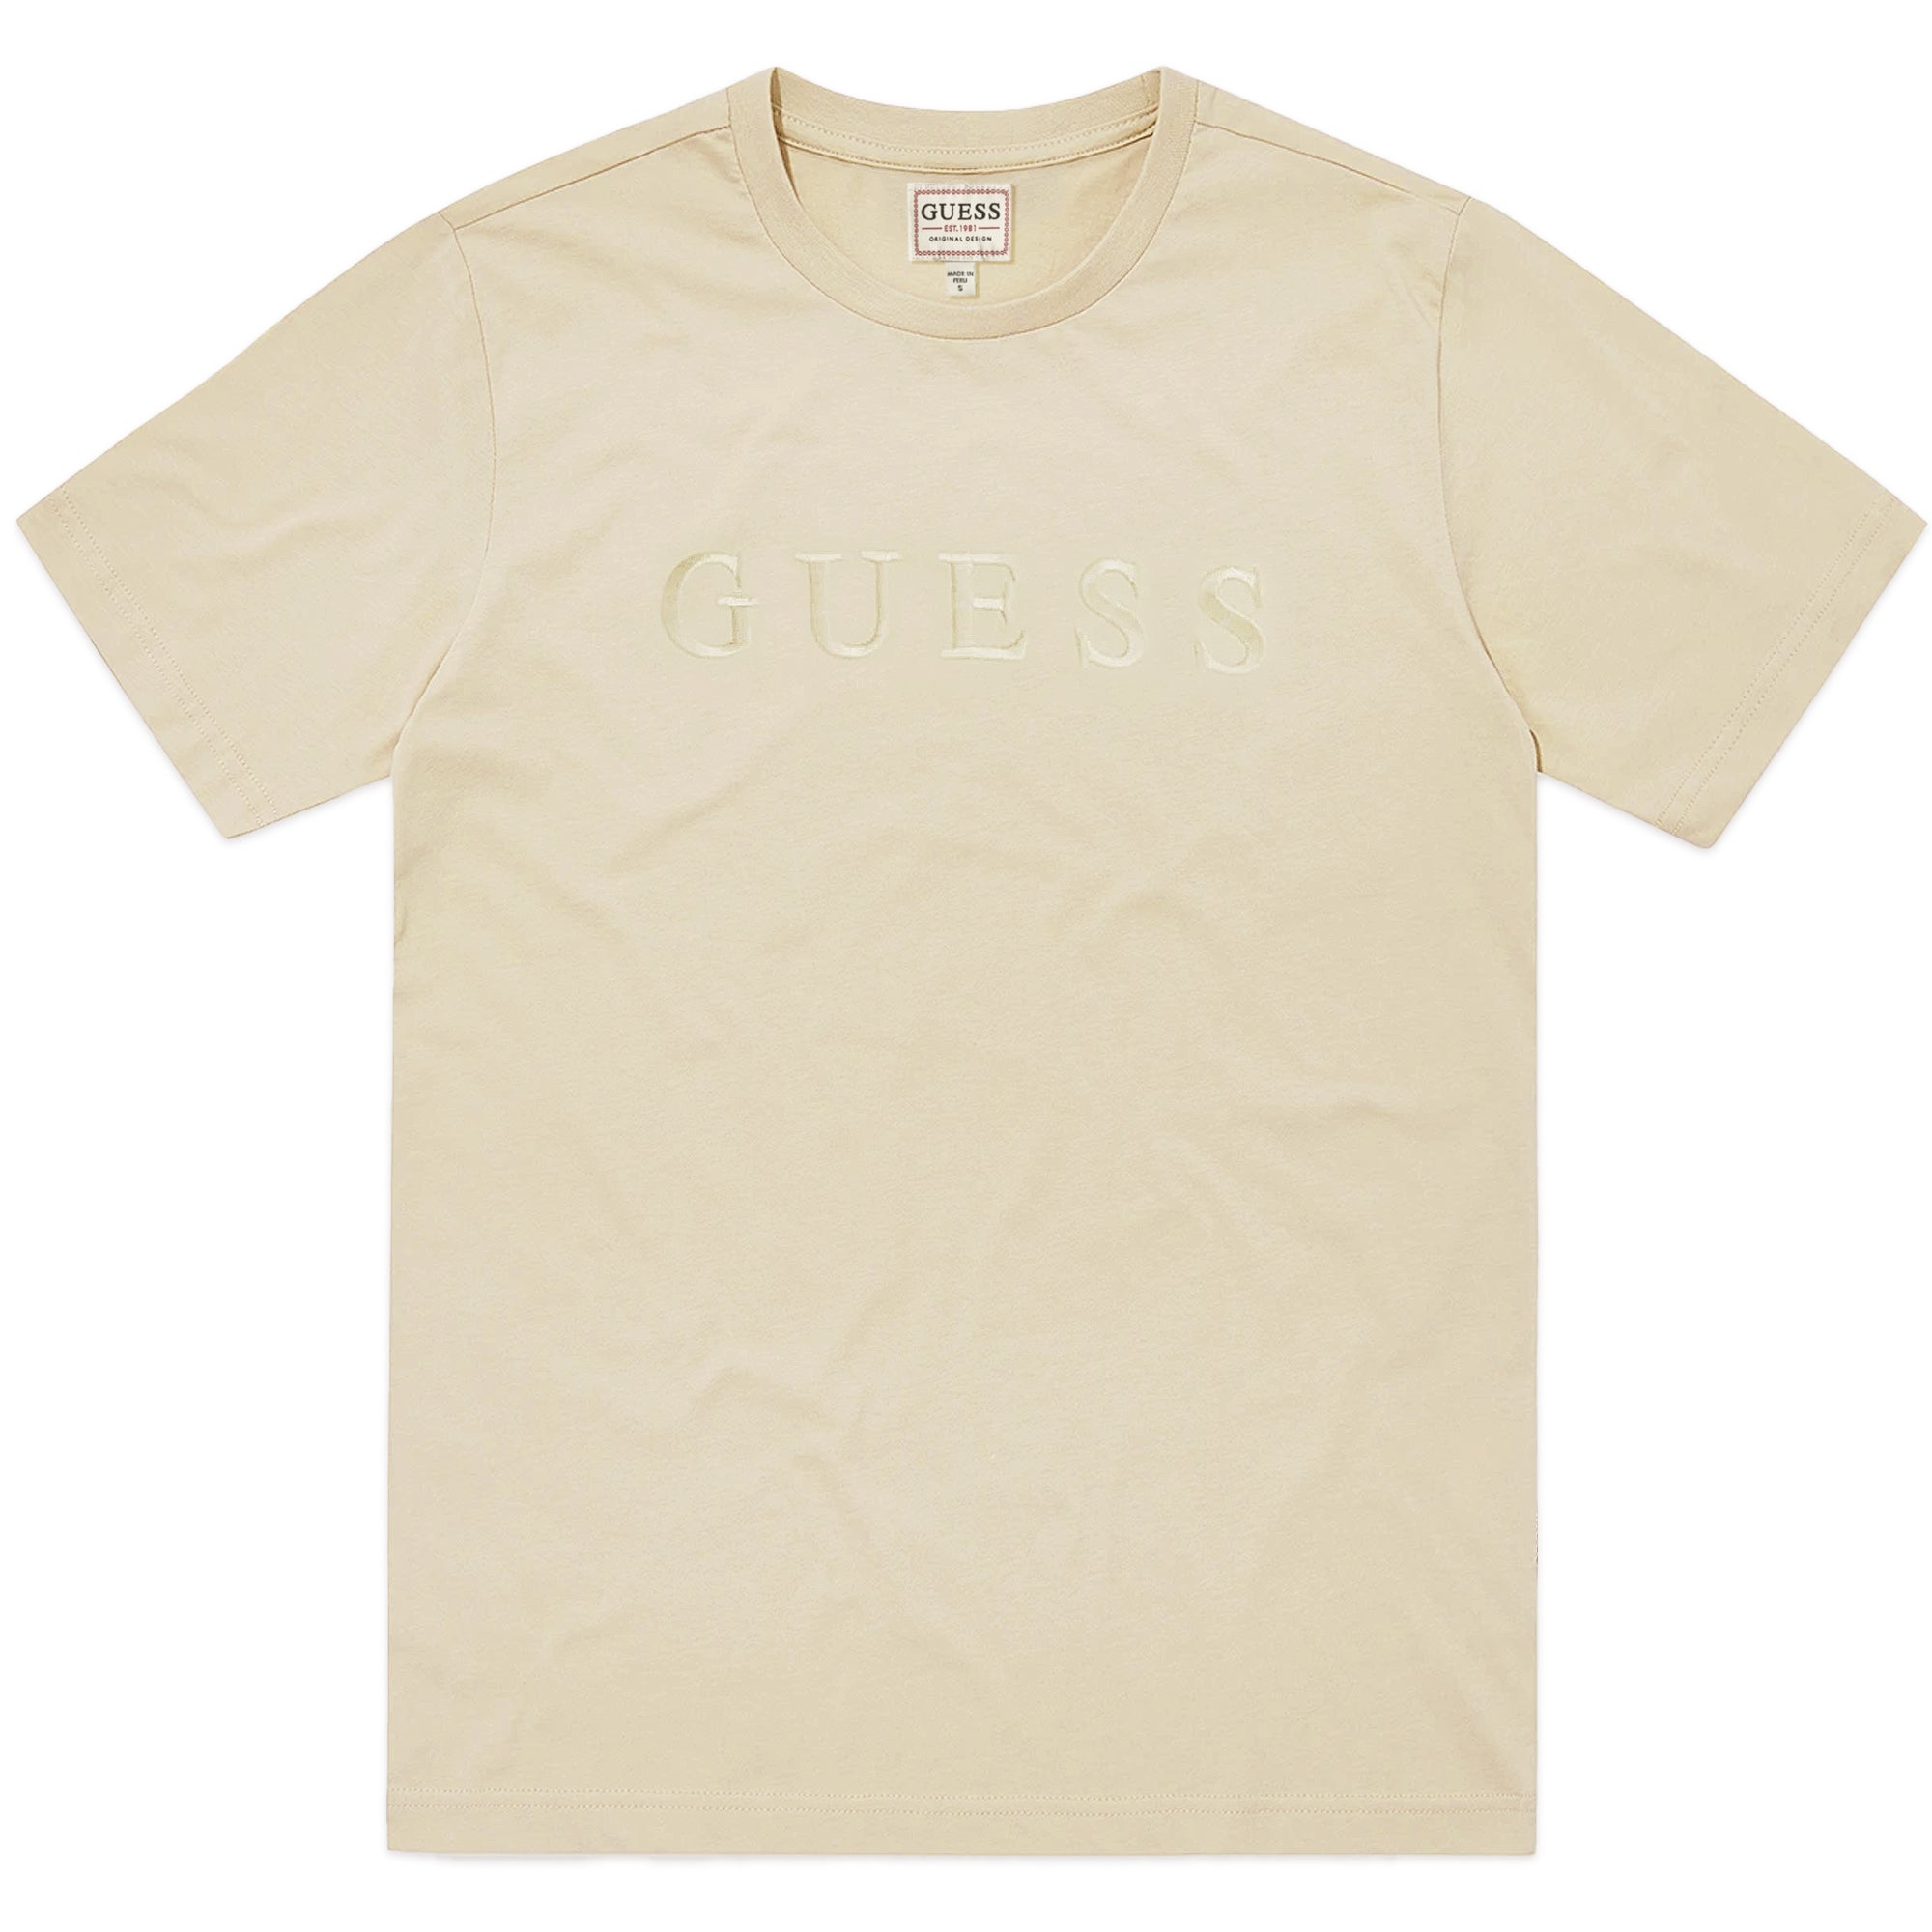 Guess Pima Cotton Embroidery Logo T-Shirt - Nomad